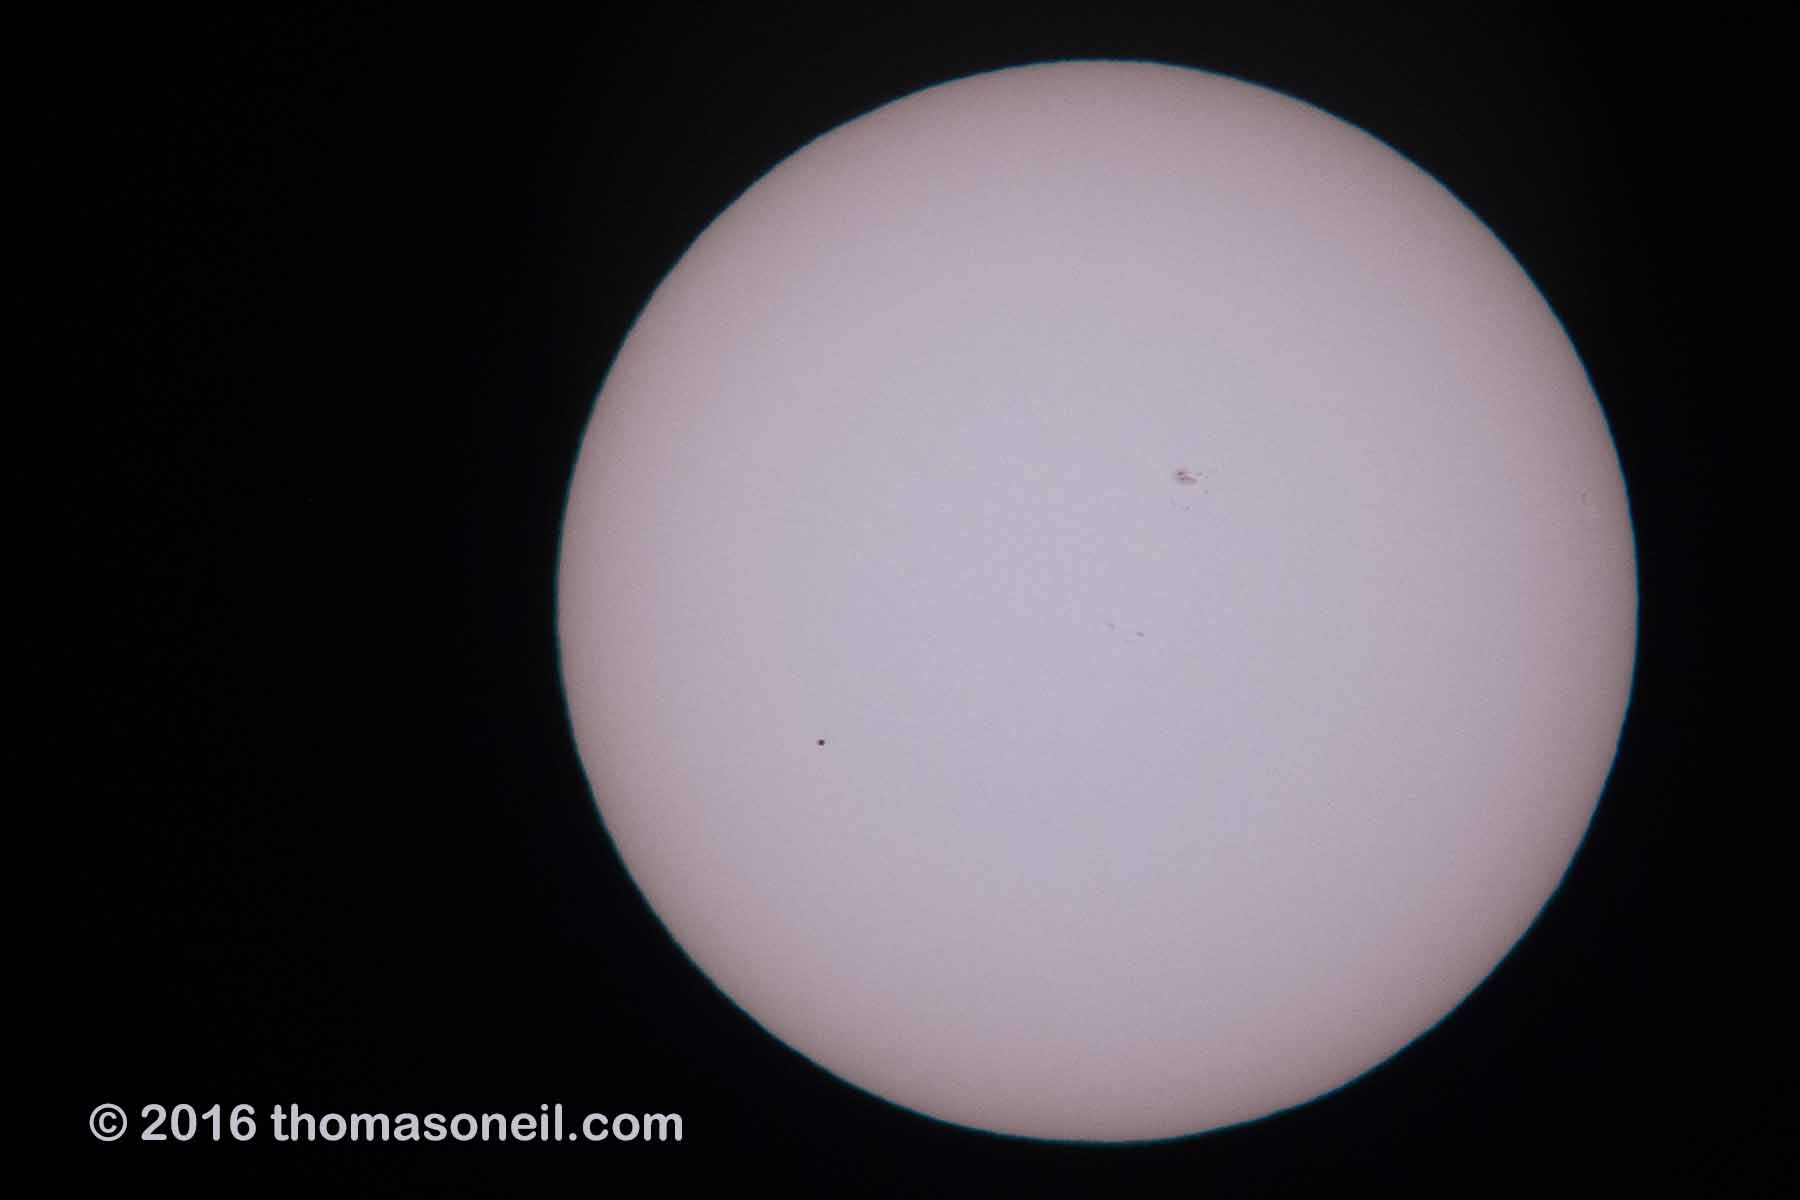 A bad image of the Transit of Mercury, May 9, 2016.  Mercury is the dot toward the lower left.  The day was mostly cloudy/hazy and I was surprised to get anything at all.  For some of my better sun images, see the Partial Eclipse from 2014, the Transit of Venus from 2004, or the Annual Eclipse as seen from Iceland in 2003.  Click for next photo.